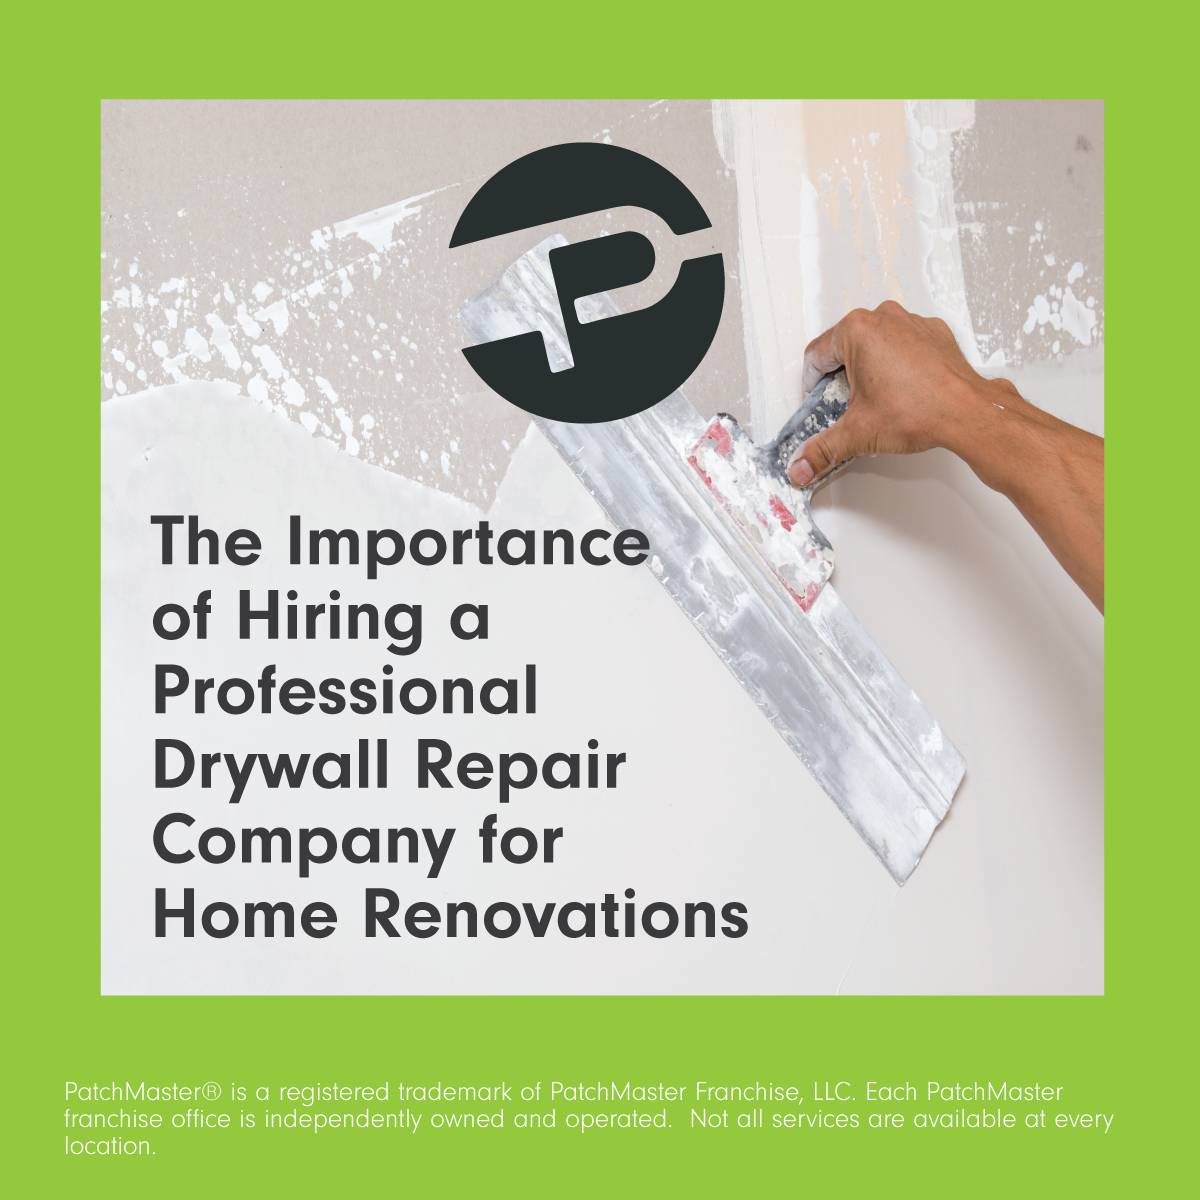 The Importance of Hiring a Professional Drywall Repair Company for Home Renovations